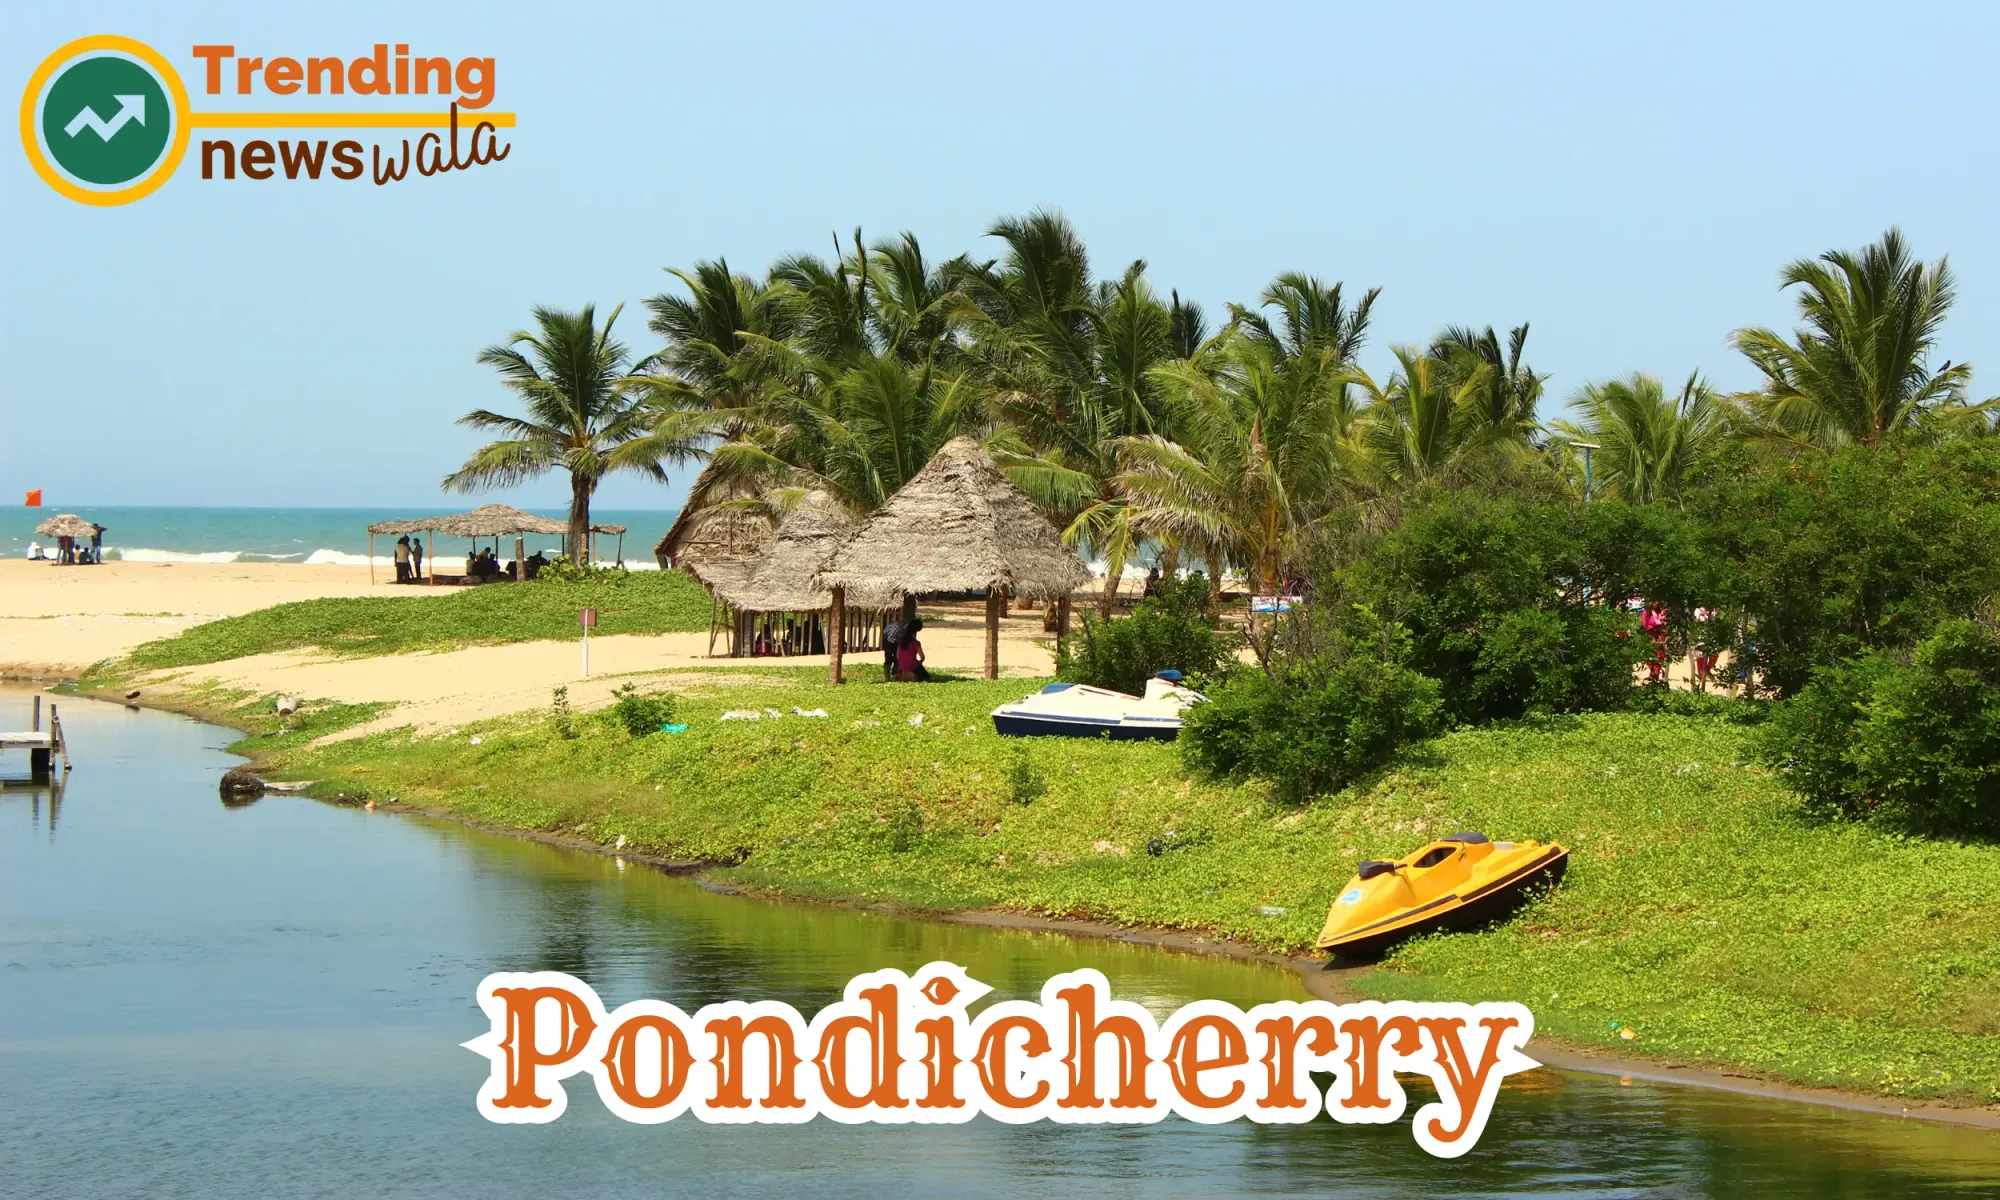 Pondicherry, officially known as Puducherry, is a Union Territory in India